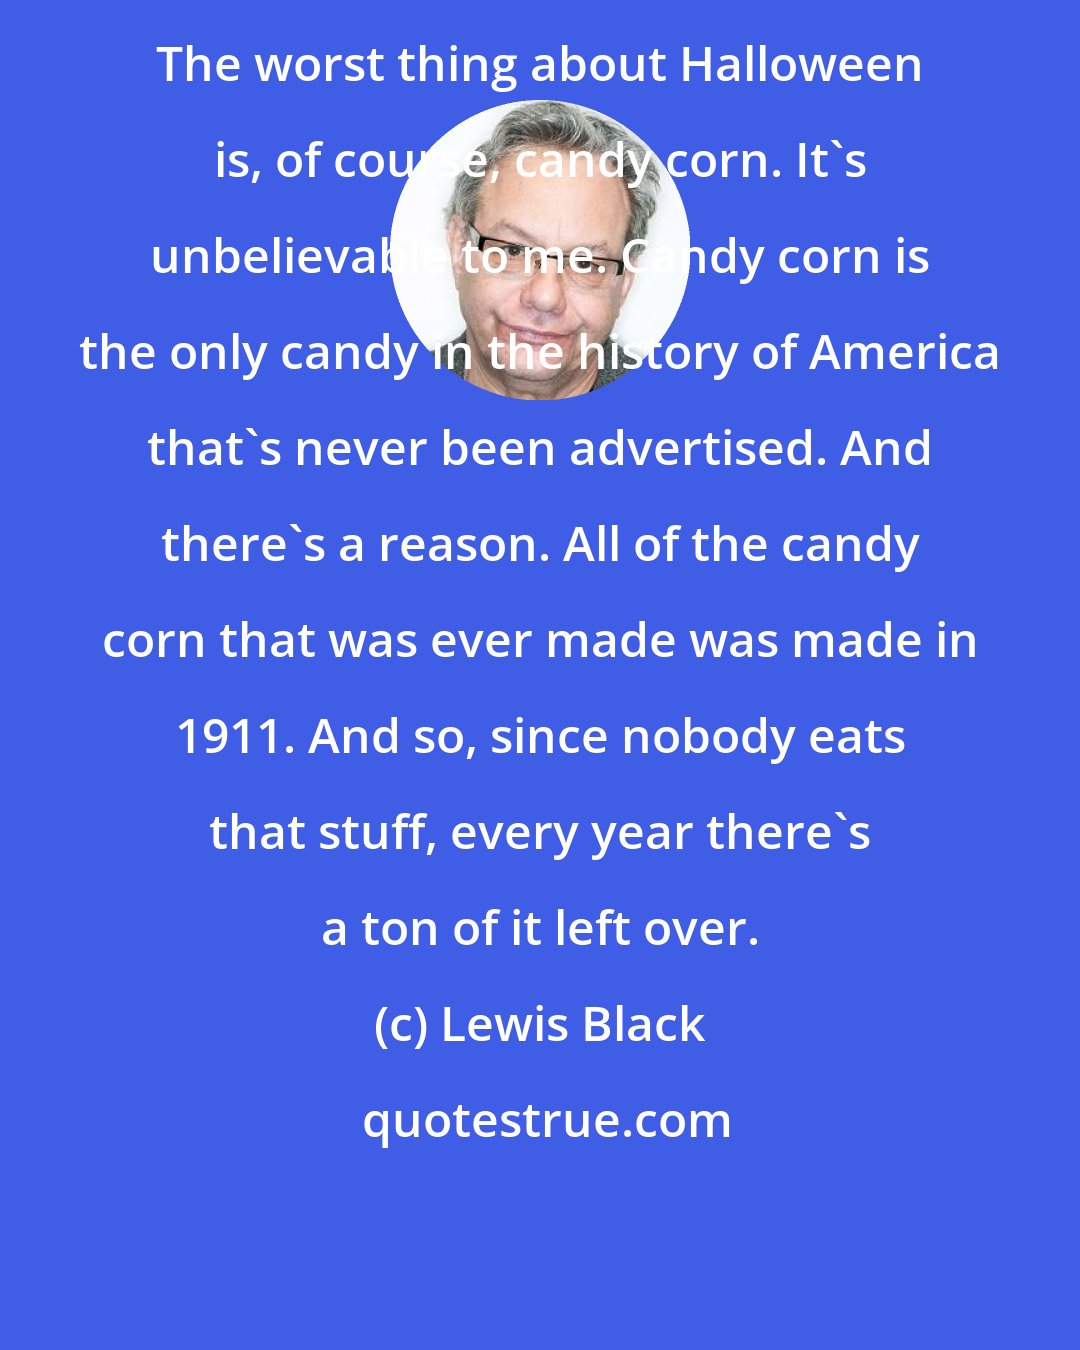 Lewis Black: The worst thing about Halloween is, of course, candy corn. It's unbelievable to me. Candy corn is the only candy in the history of America that's never been advertised. And there's a reason. All of the candy corn that was ever made was made in 1911. And so, since nobody eats that stuff, every year there's a ton of it left over.